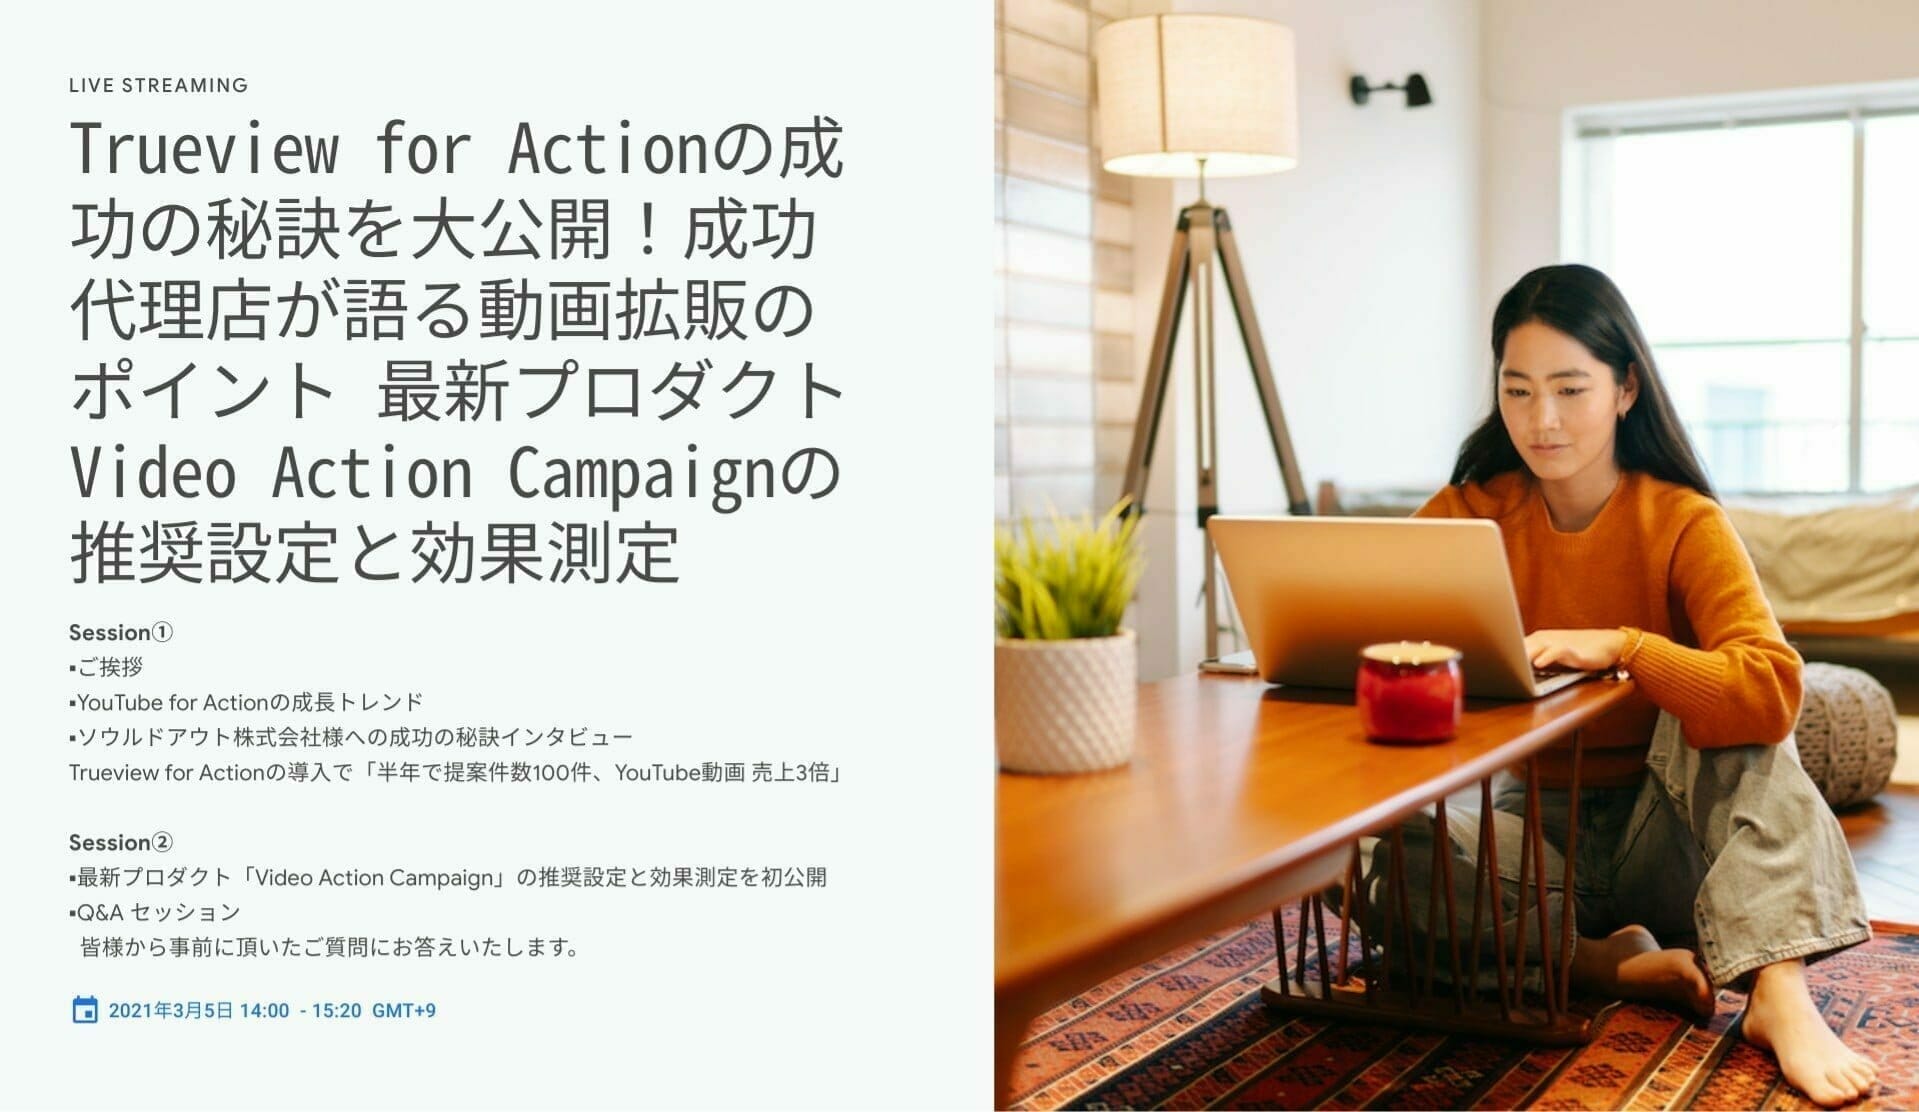 [Google 広告] Trueview for Actionの成功の秘訣を大公開！成功代理店が語る動画拡販のポイント 最新プロダクトVideo Action Campaignの推奨設定と効果測定